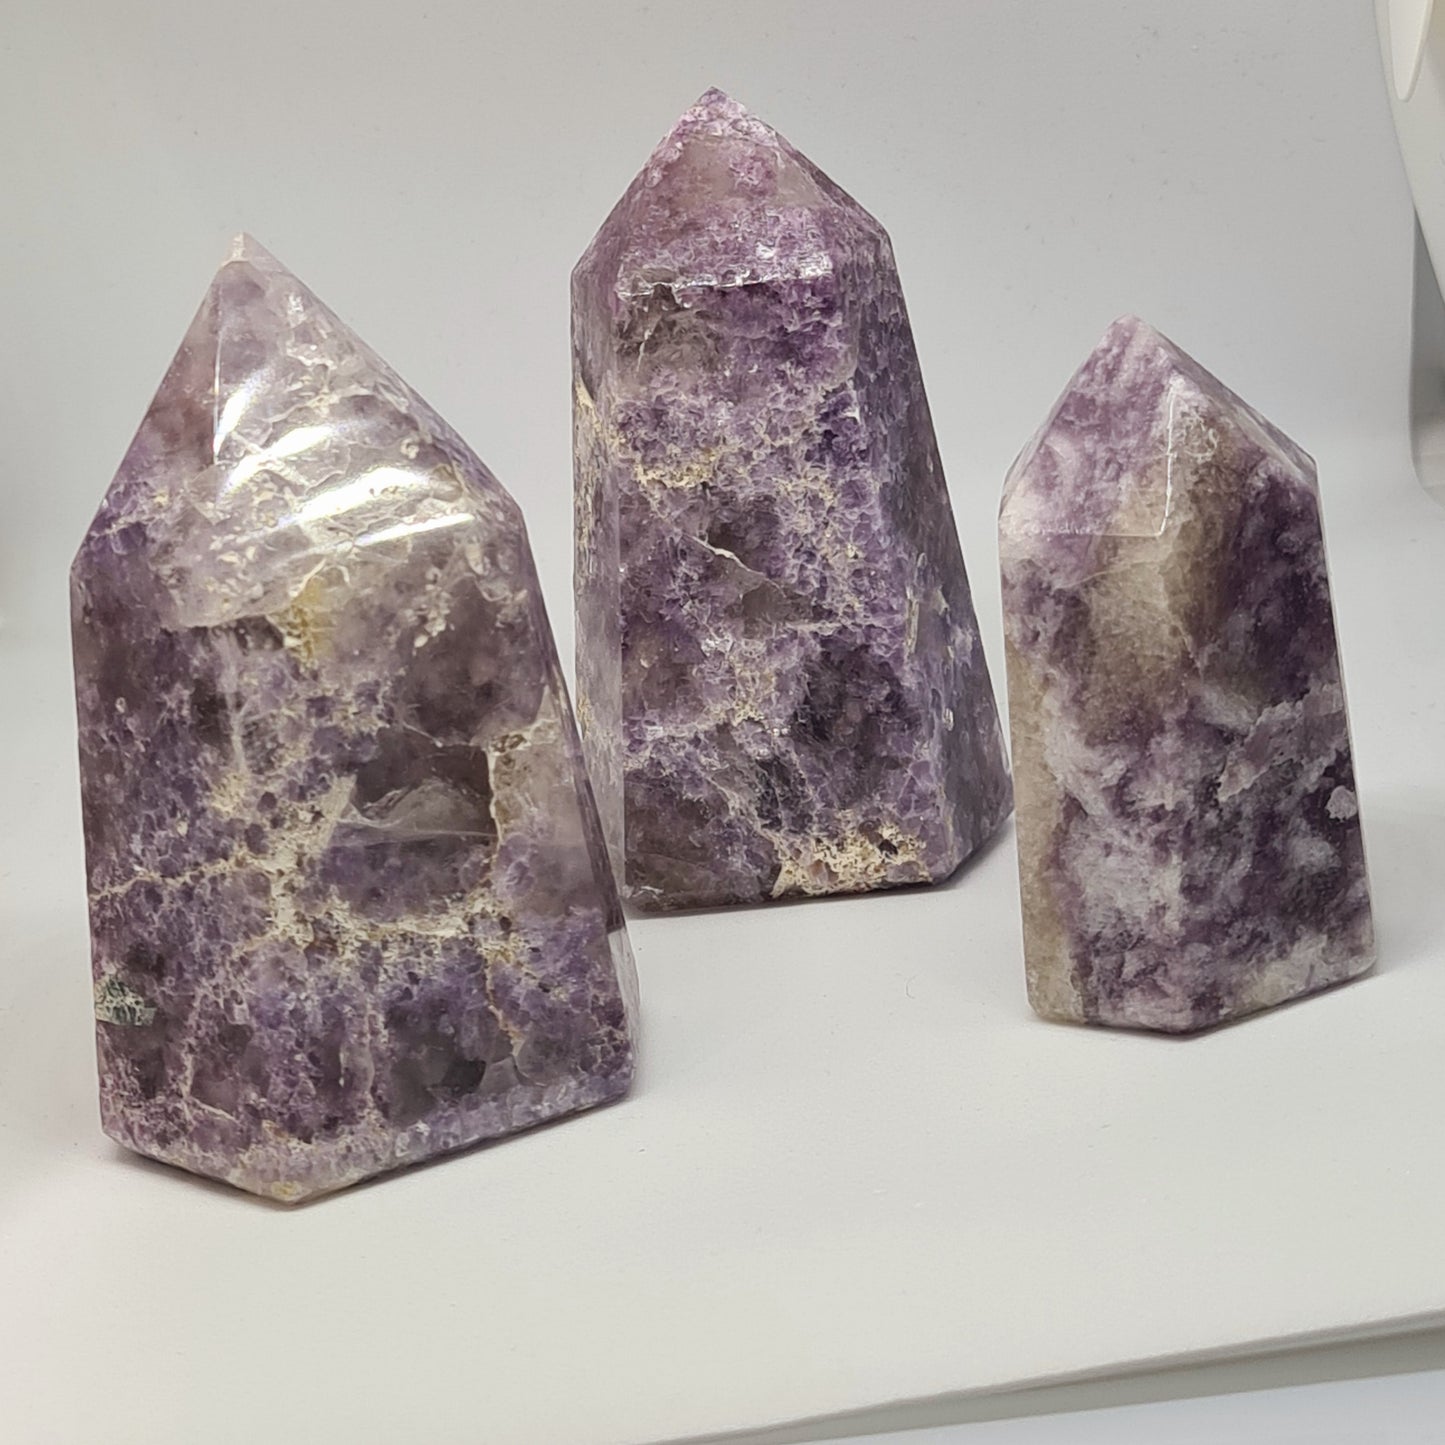 Three Incredible purple mica / lepidolite towers from Brazil, some having smoky quartz inclusions